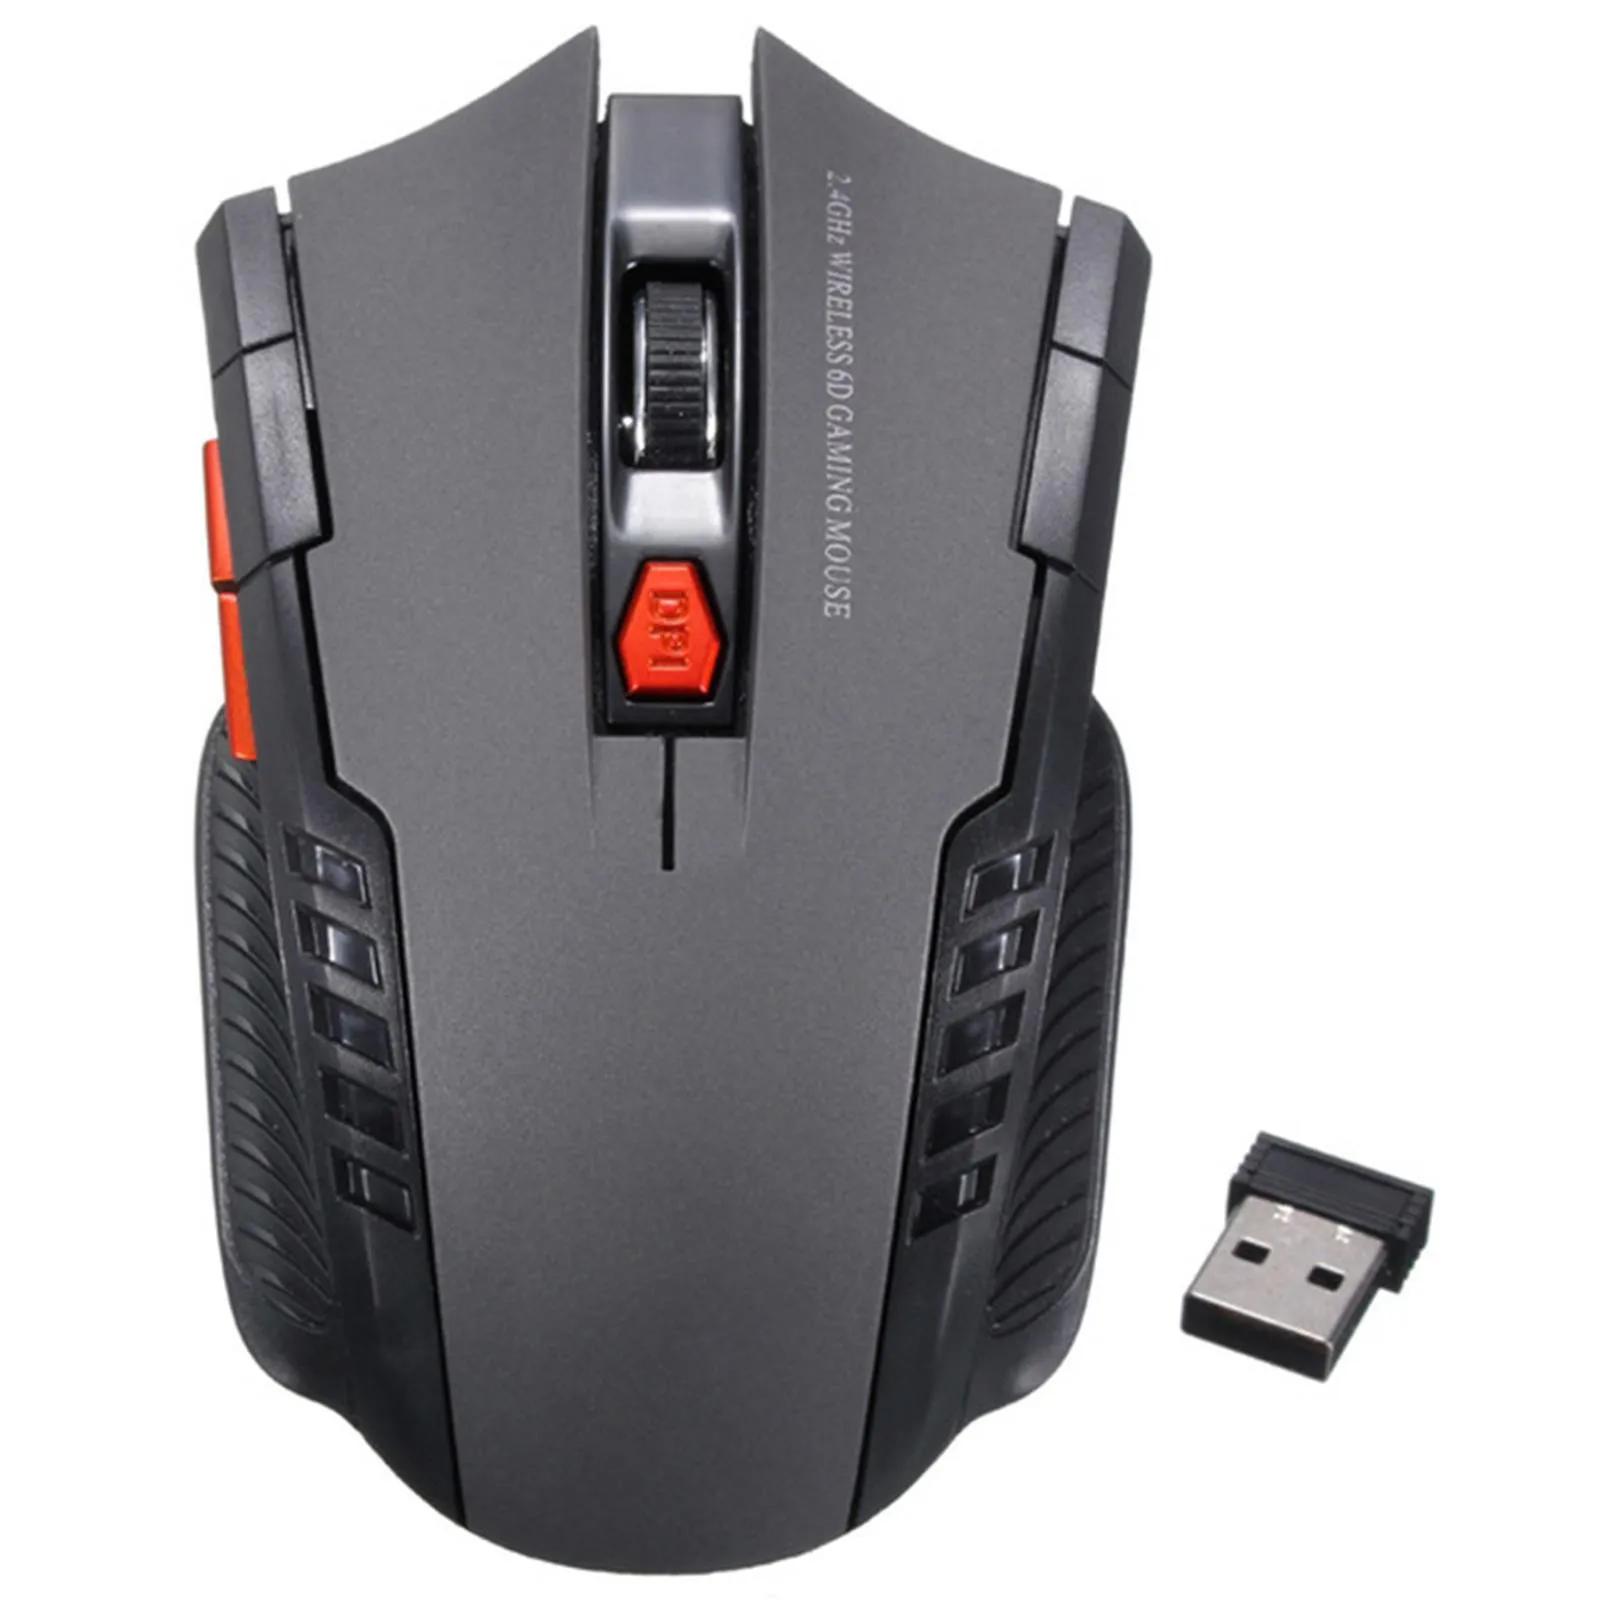 

Game Mini Wireless Mouse 6 Keys Silent For Computers PC Laptop 2.4G Optical Receiver Office Mice Wirelesss Ergonomic Accessories